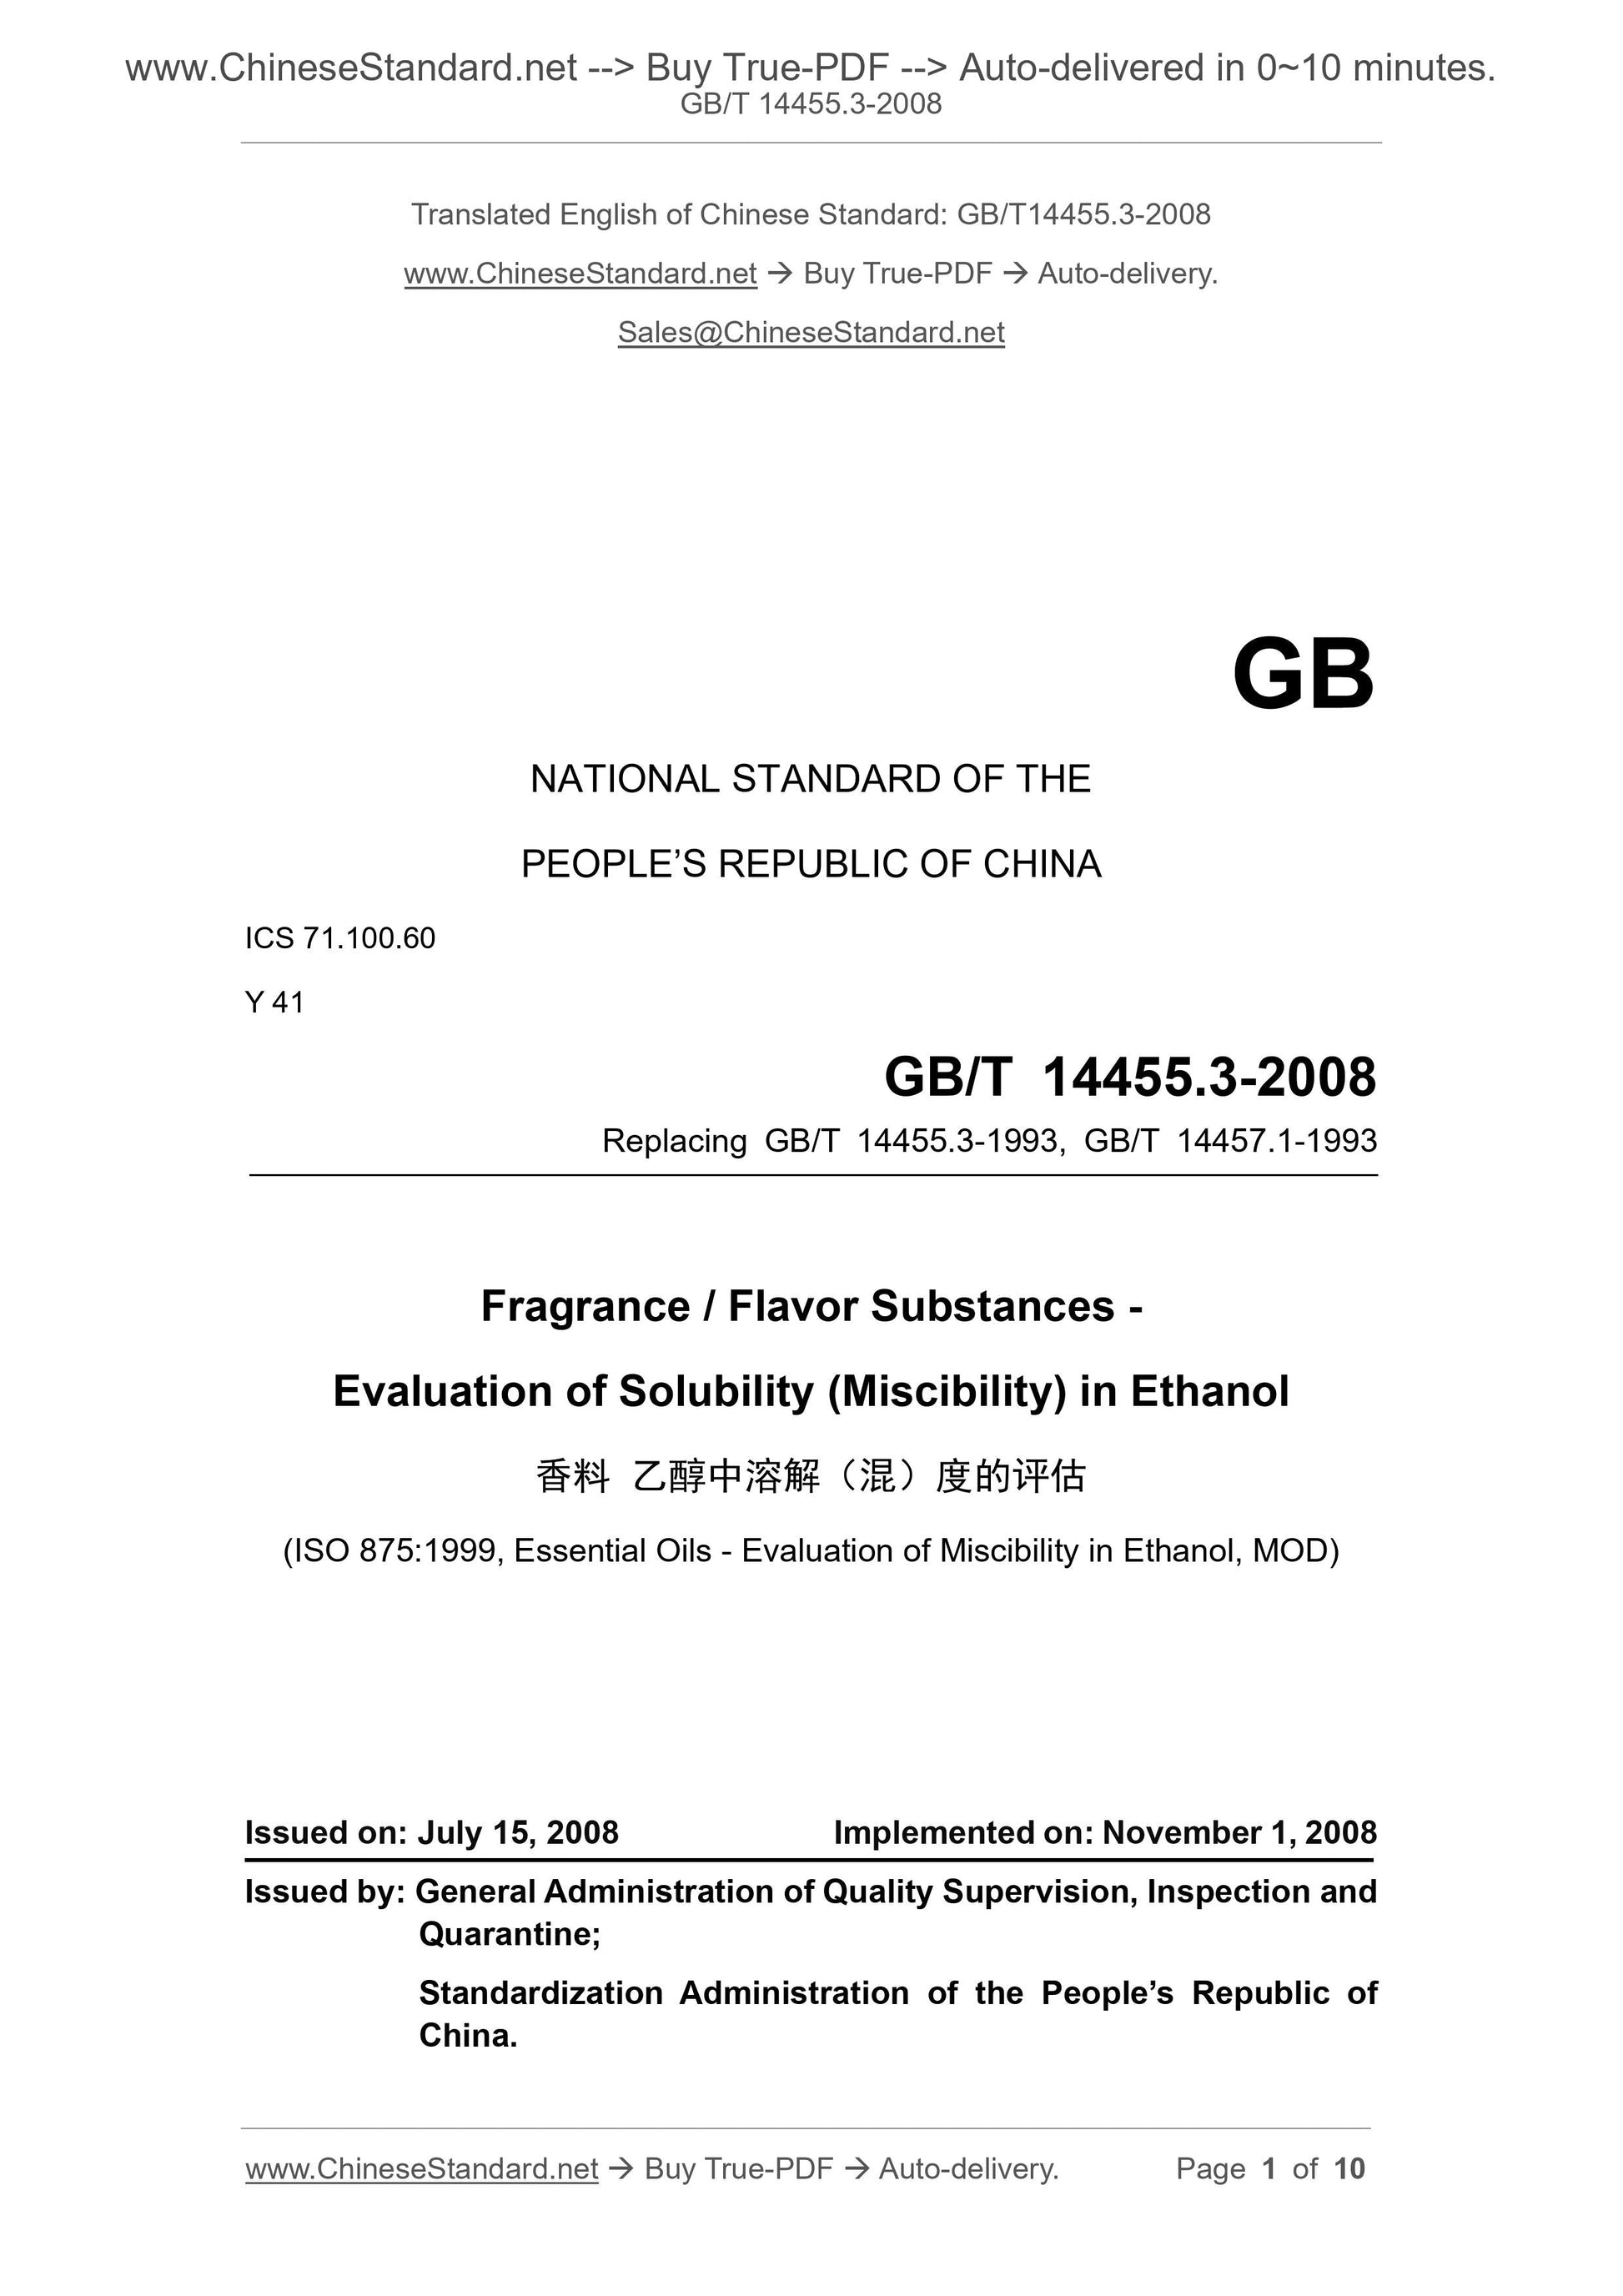 GB/T 14455.3-2008 Page 1